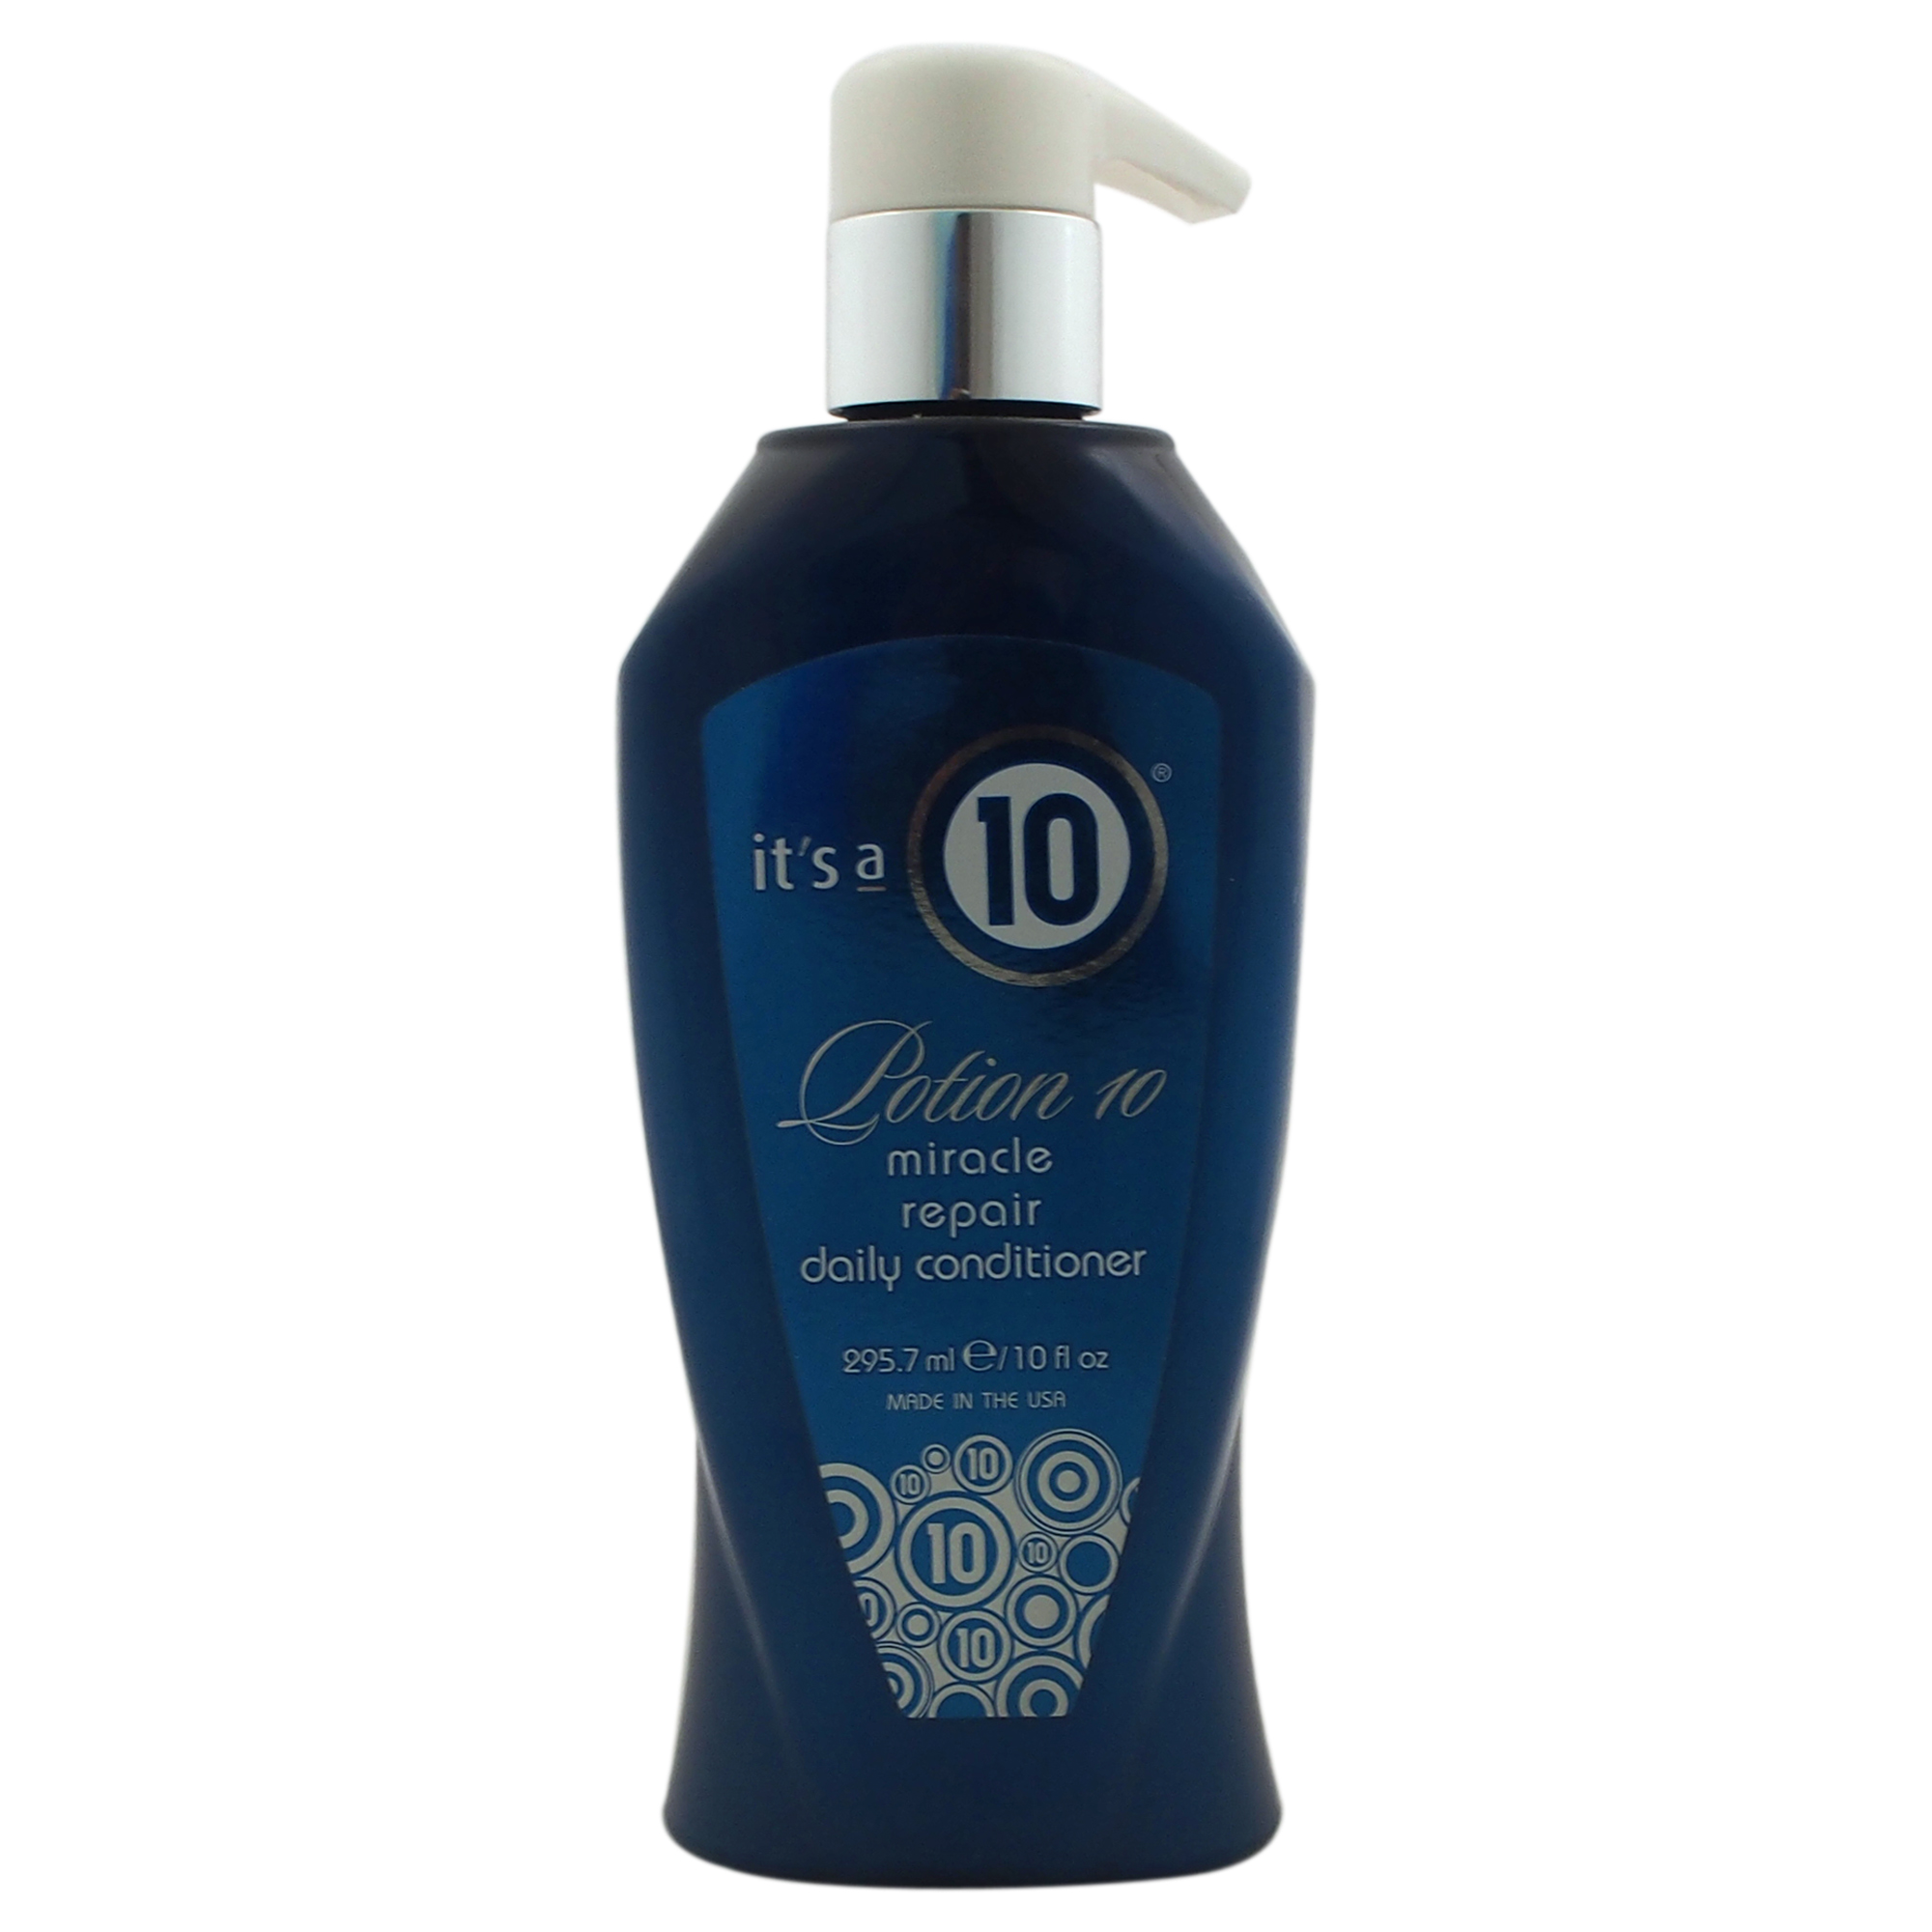 Its a 10 Potion 10 Miracle Repair Daily Conditioner